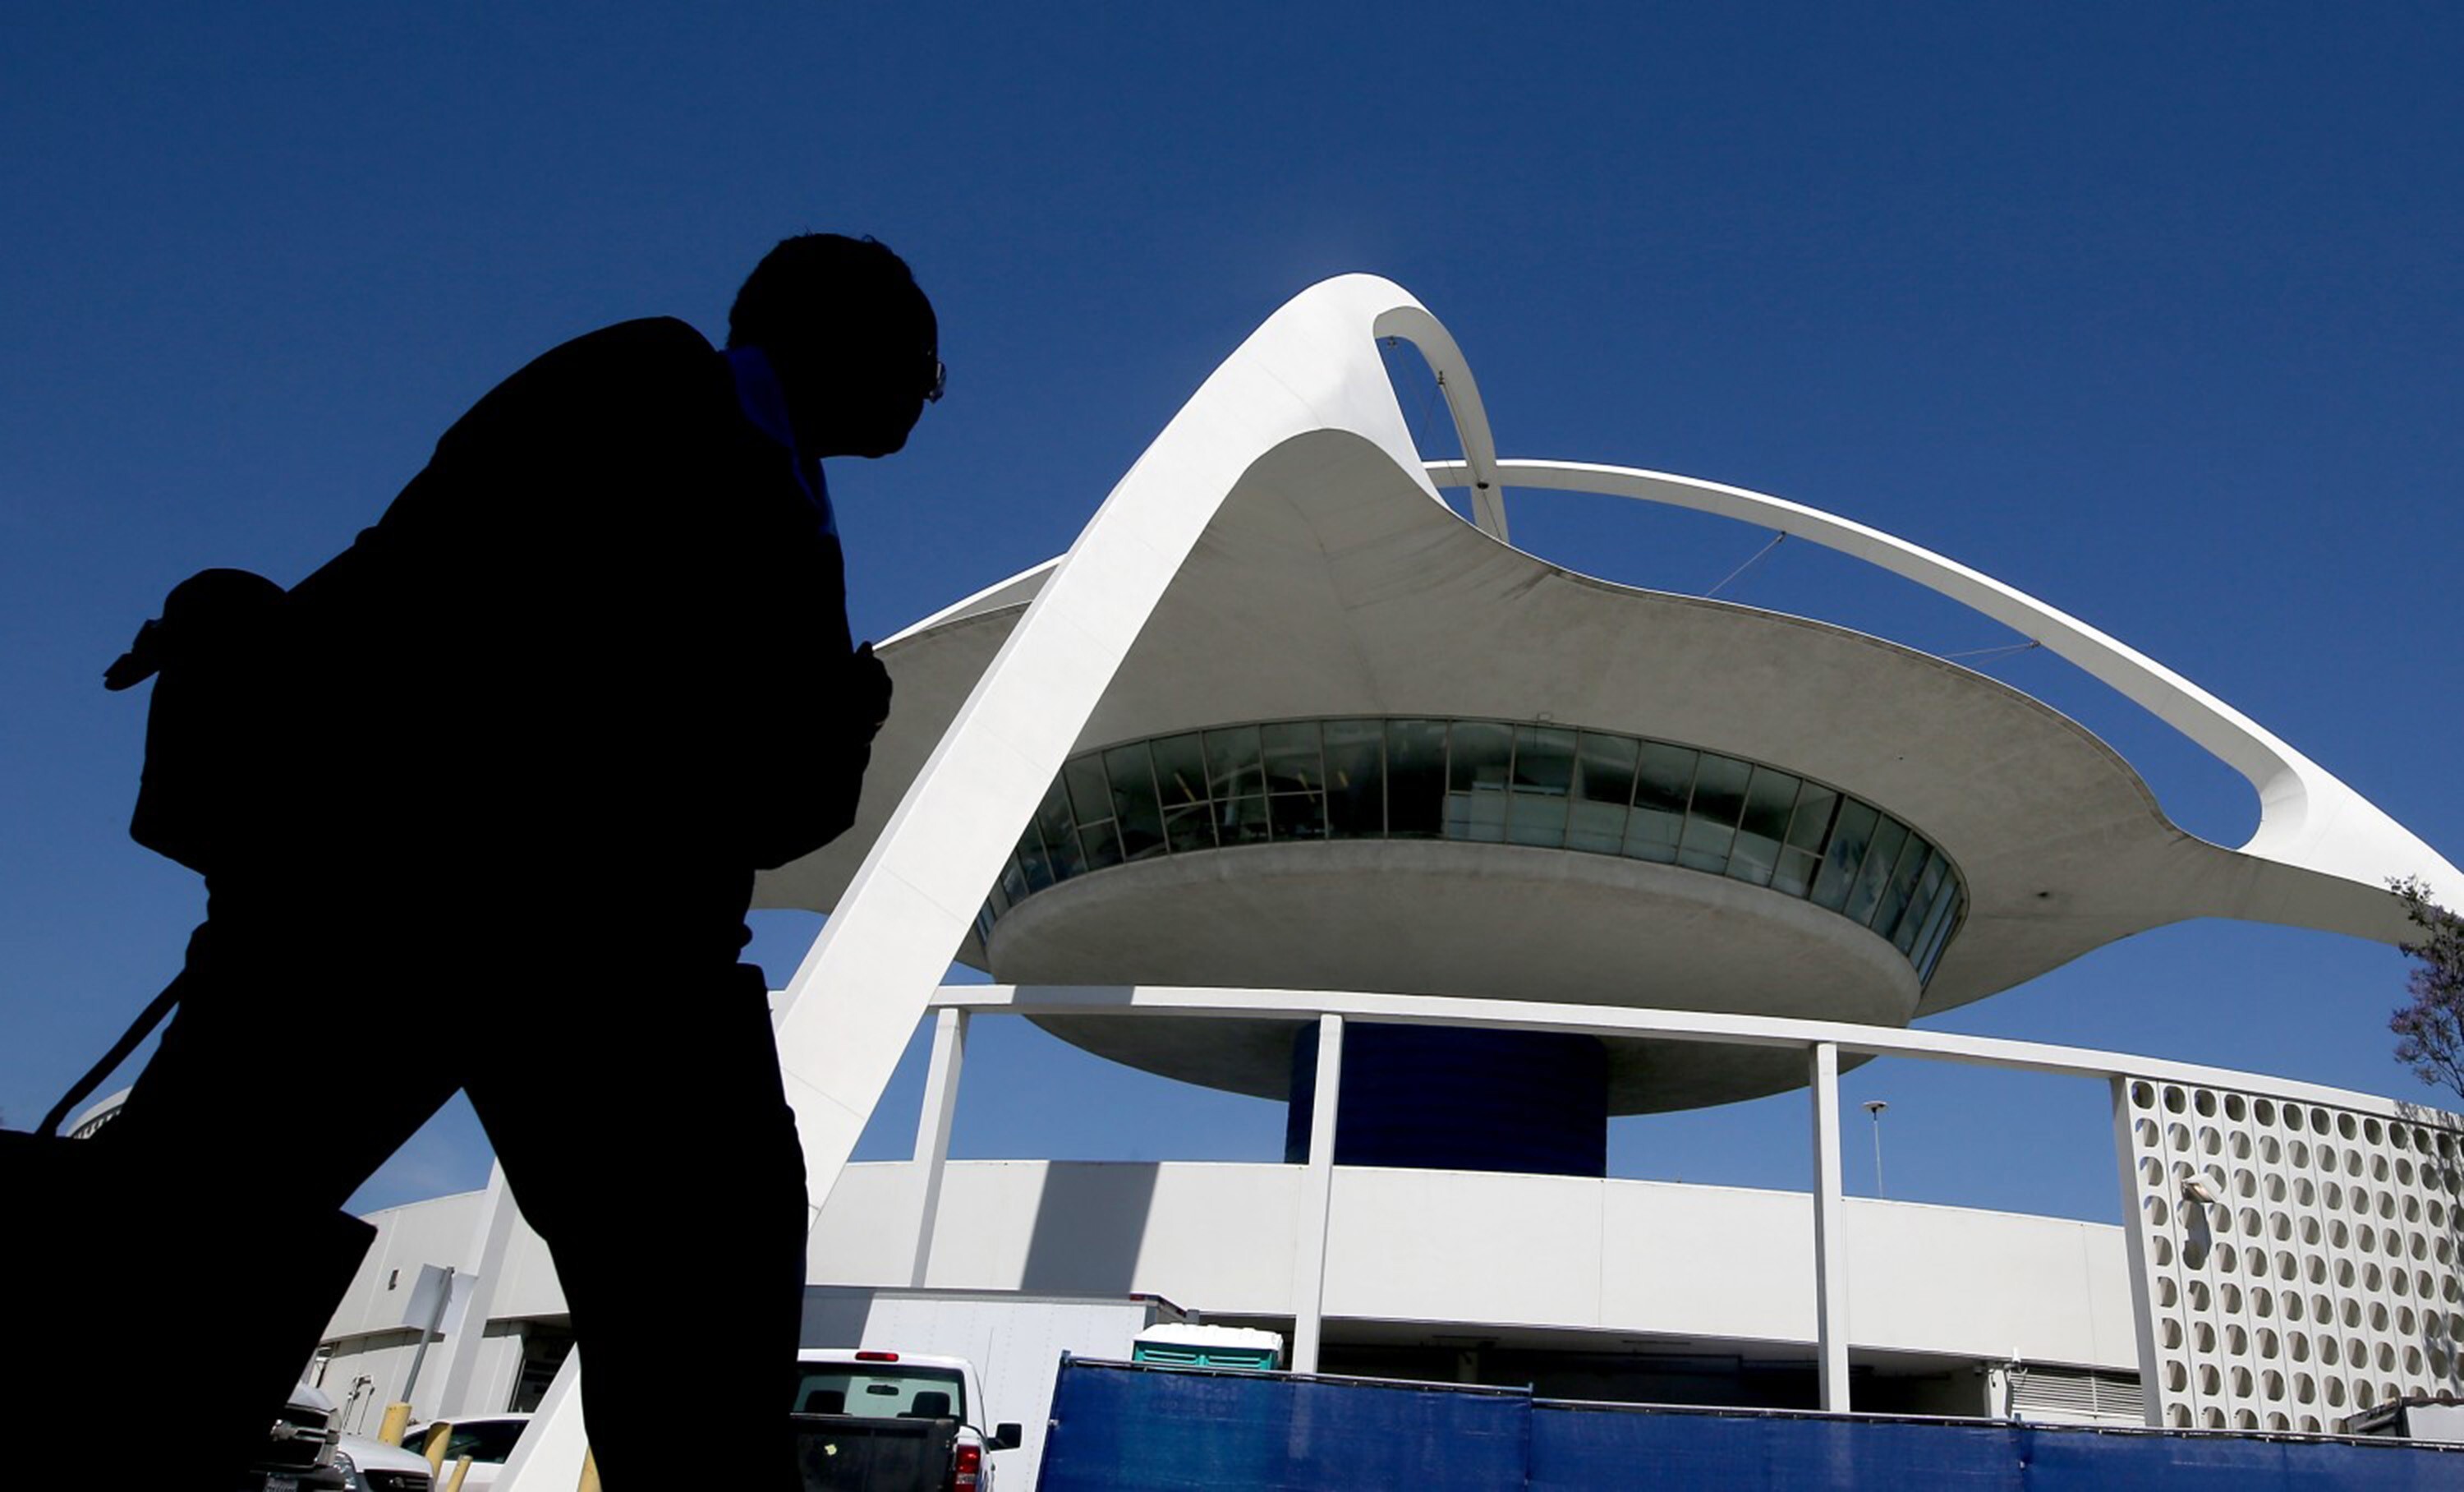 A pedestrian walks past the Theme Building between Terminals 2 and 6 at Los Angeles International Airport in 2017. Photo: TNS